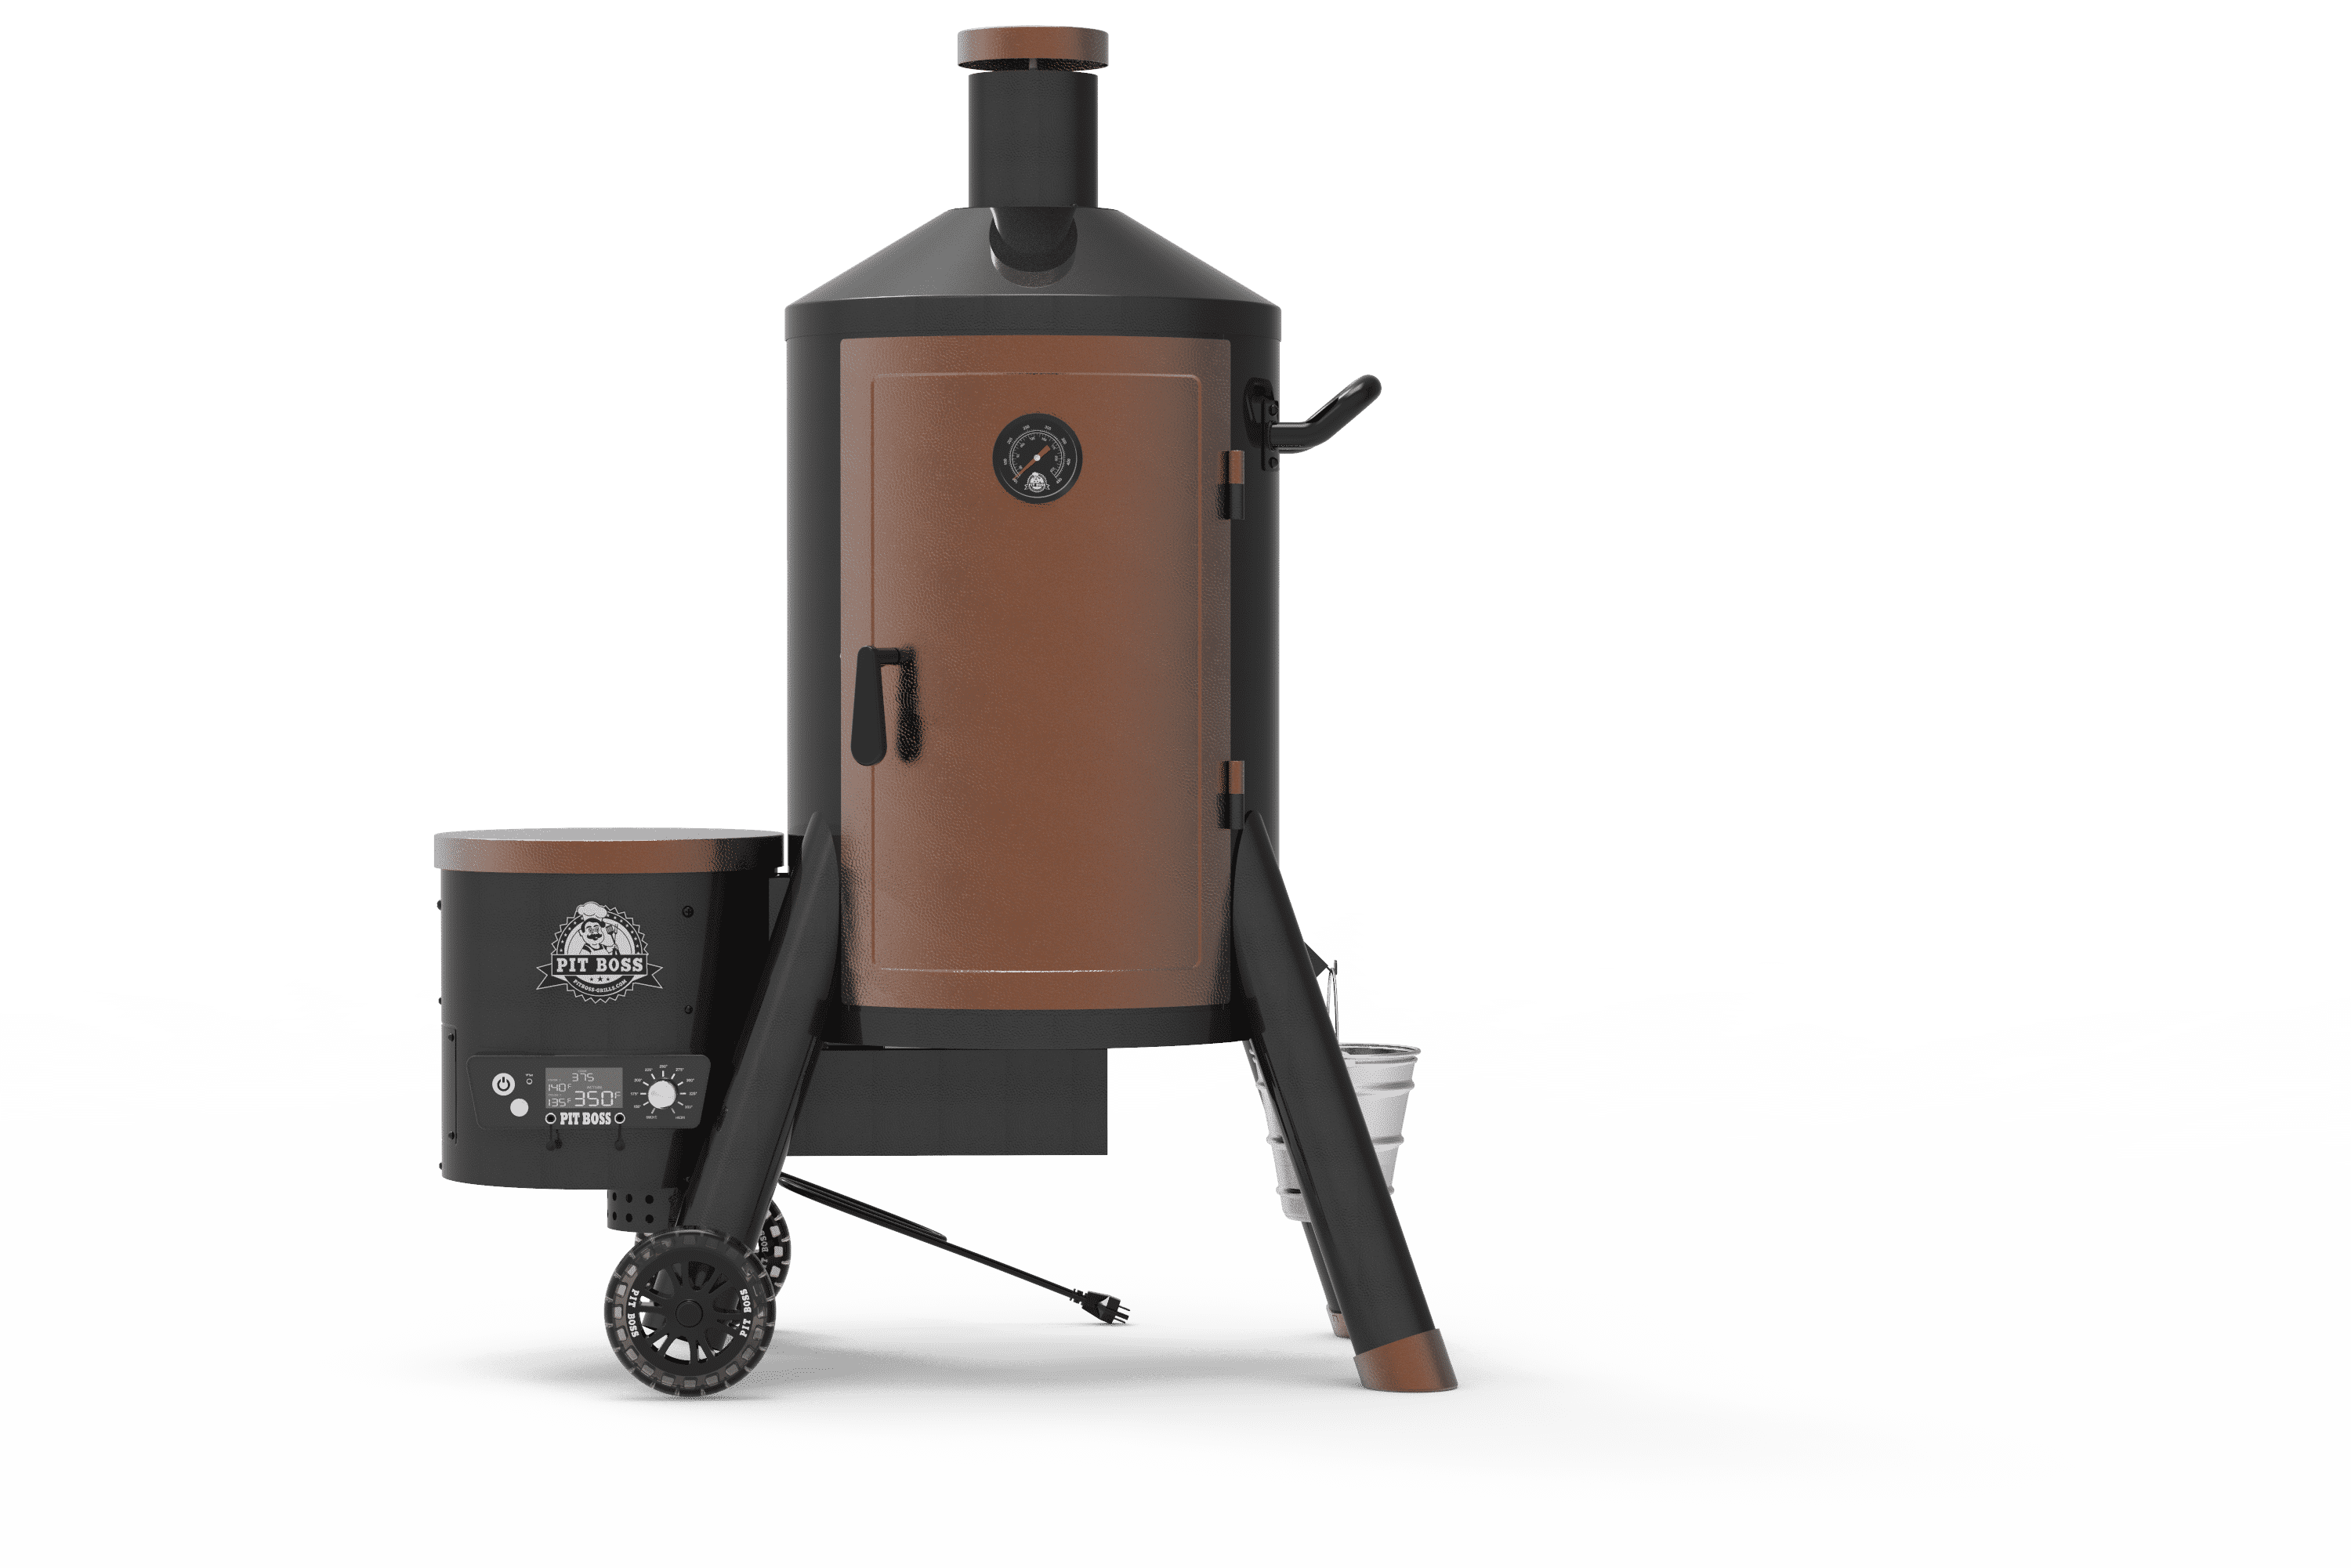 pit boss vertical smoker lowes